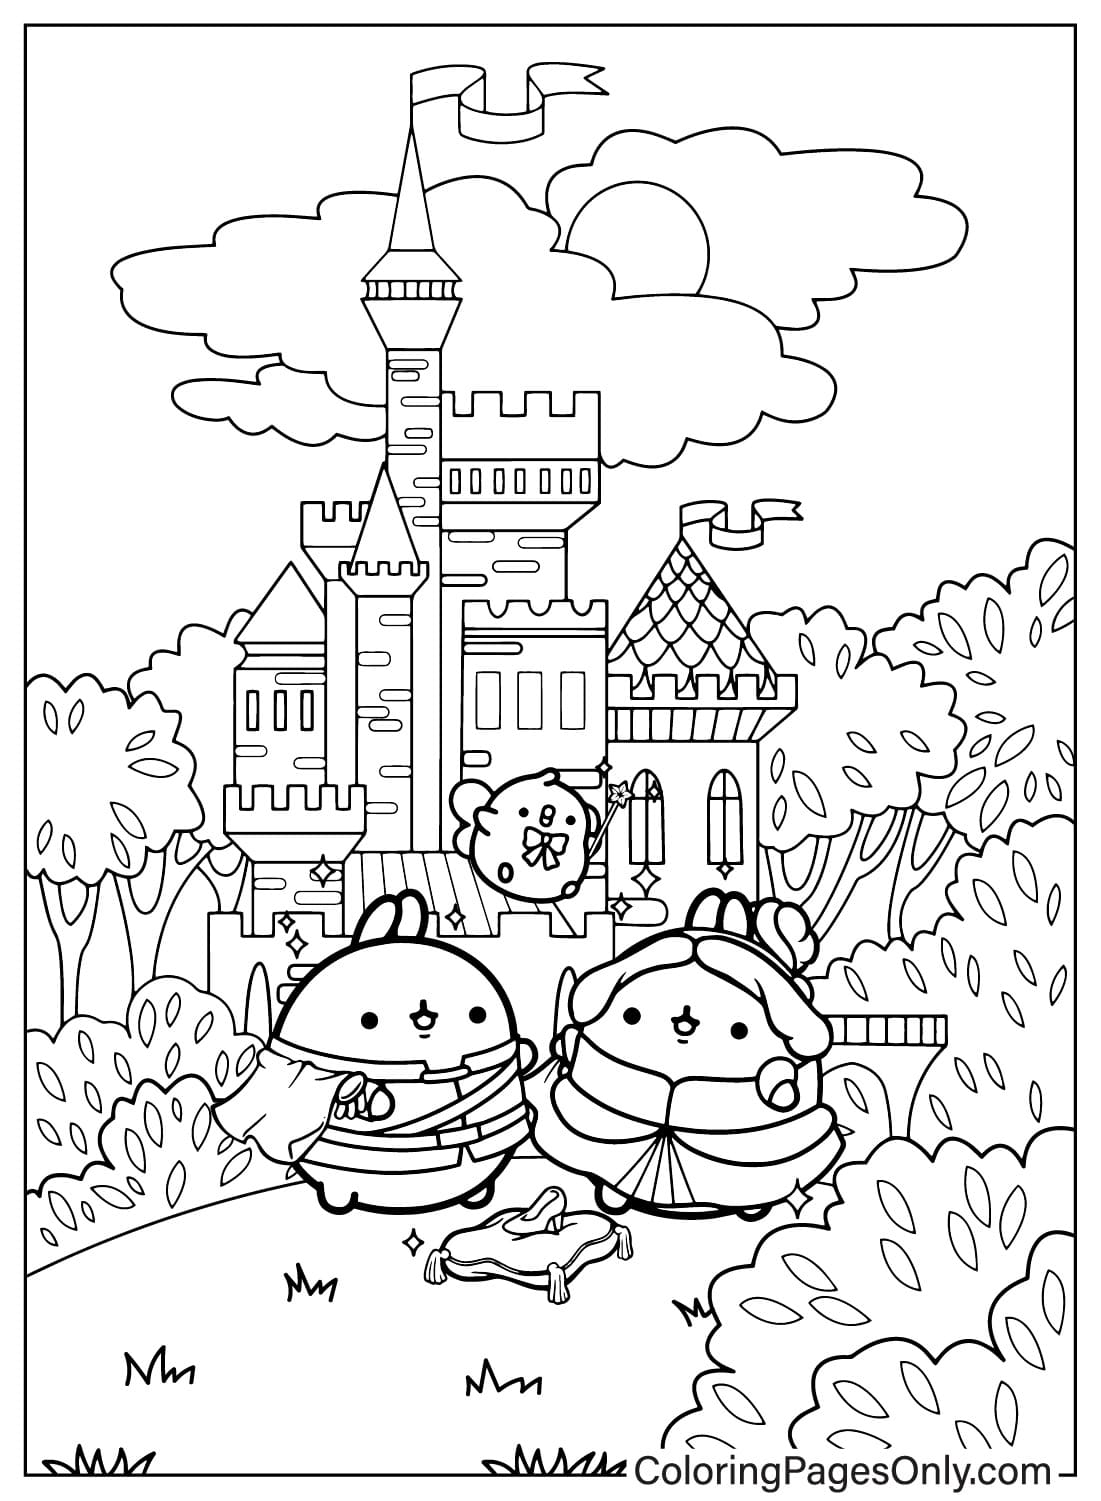 Molang and Piu Piu and the Castle Coloring Page from Molang